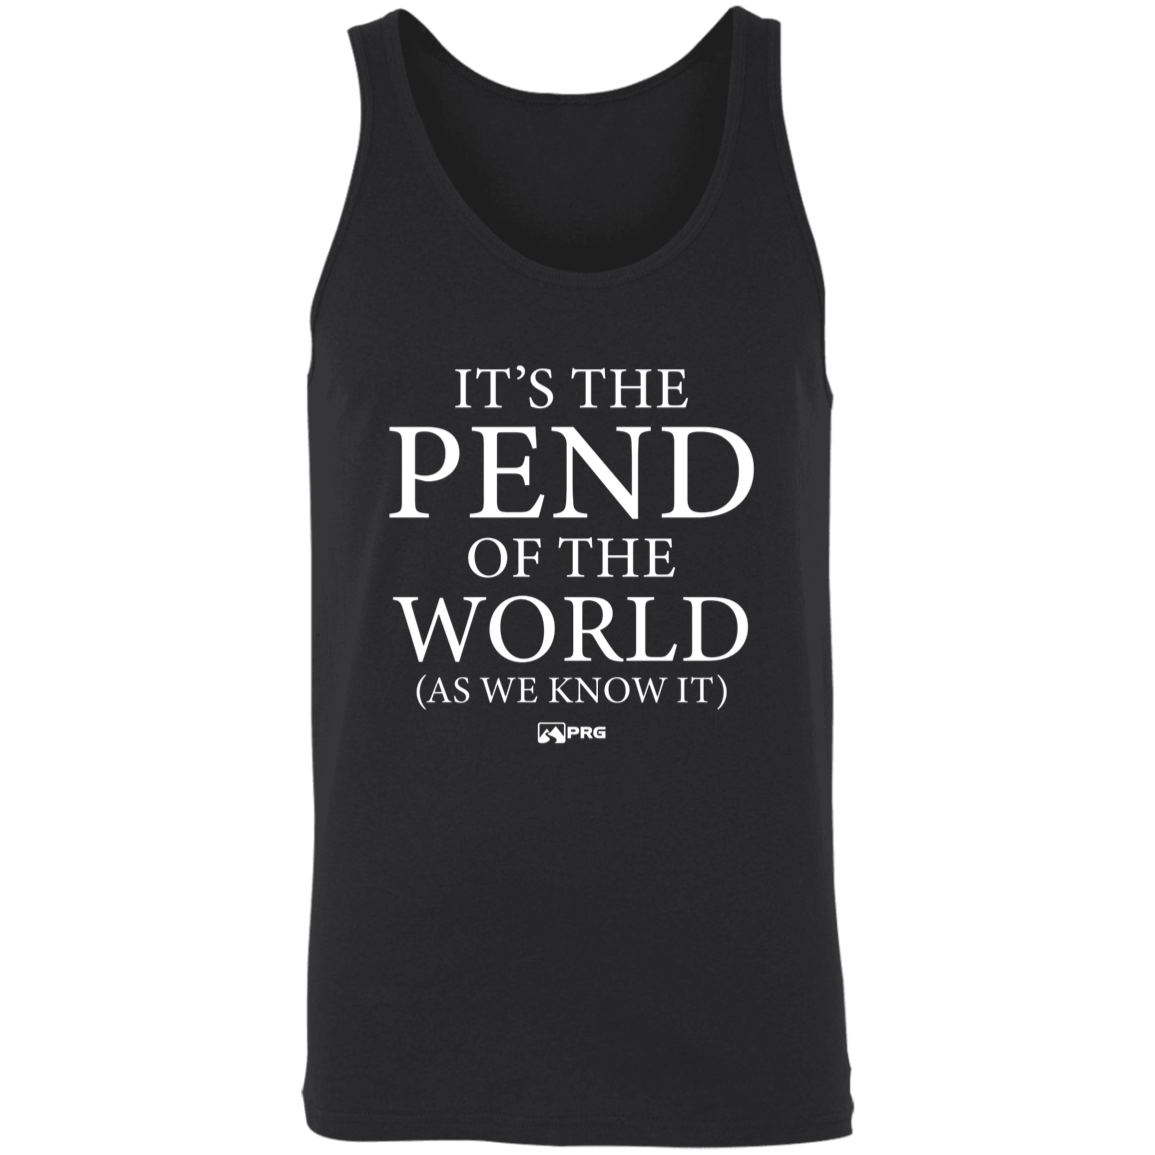 Pend of the World - Tank